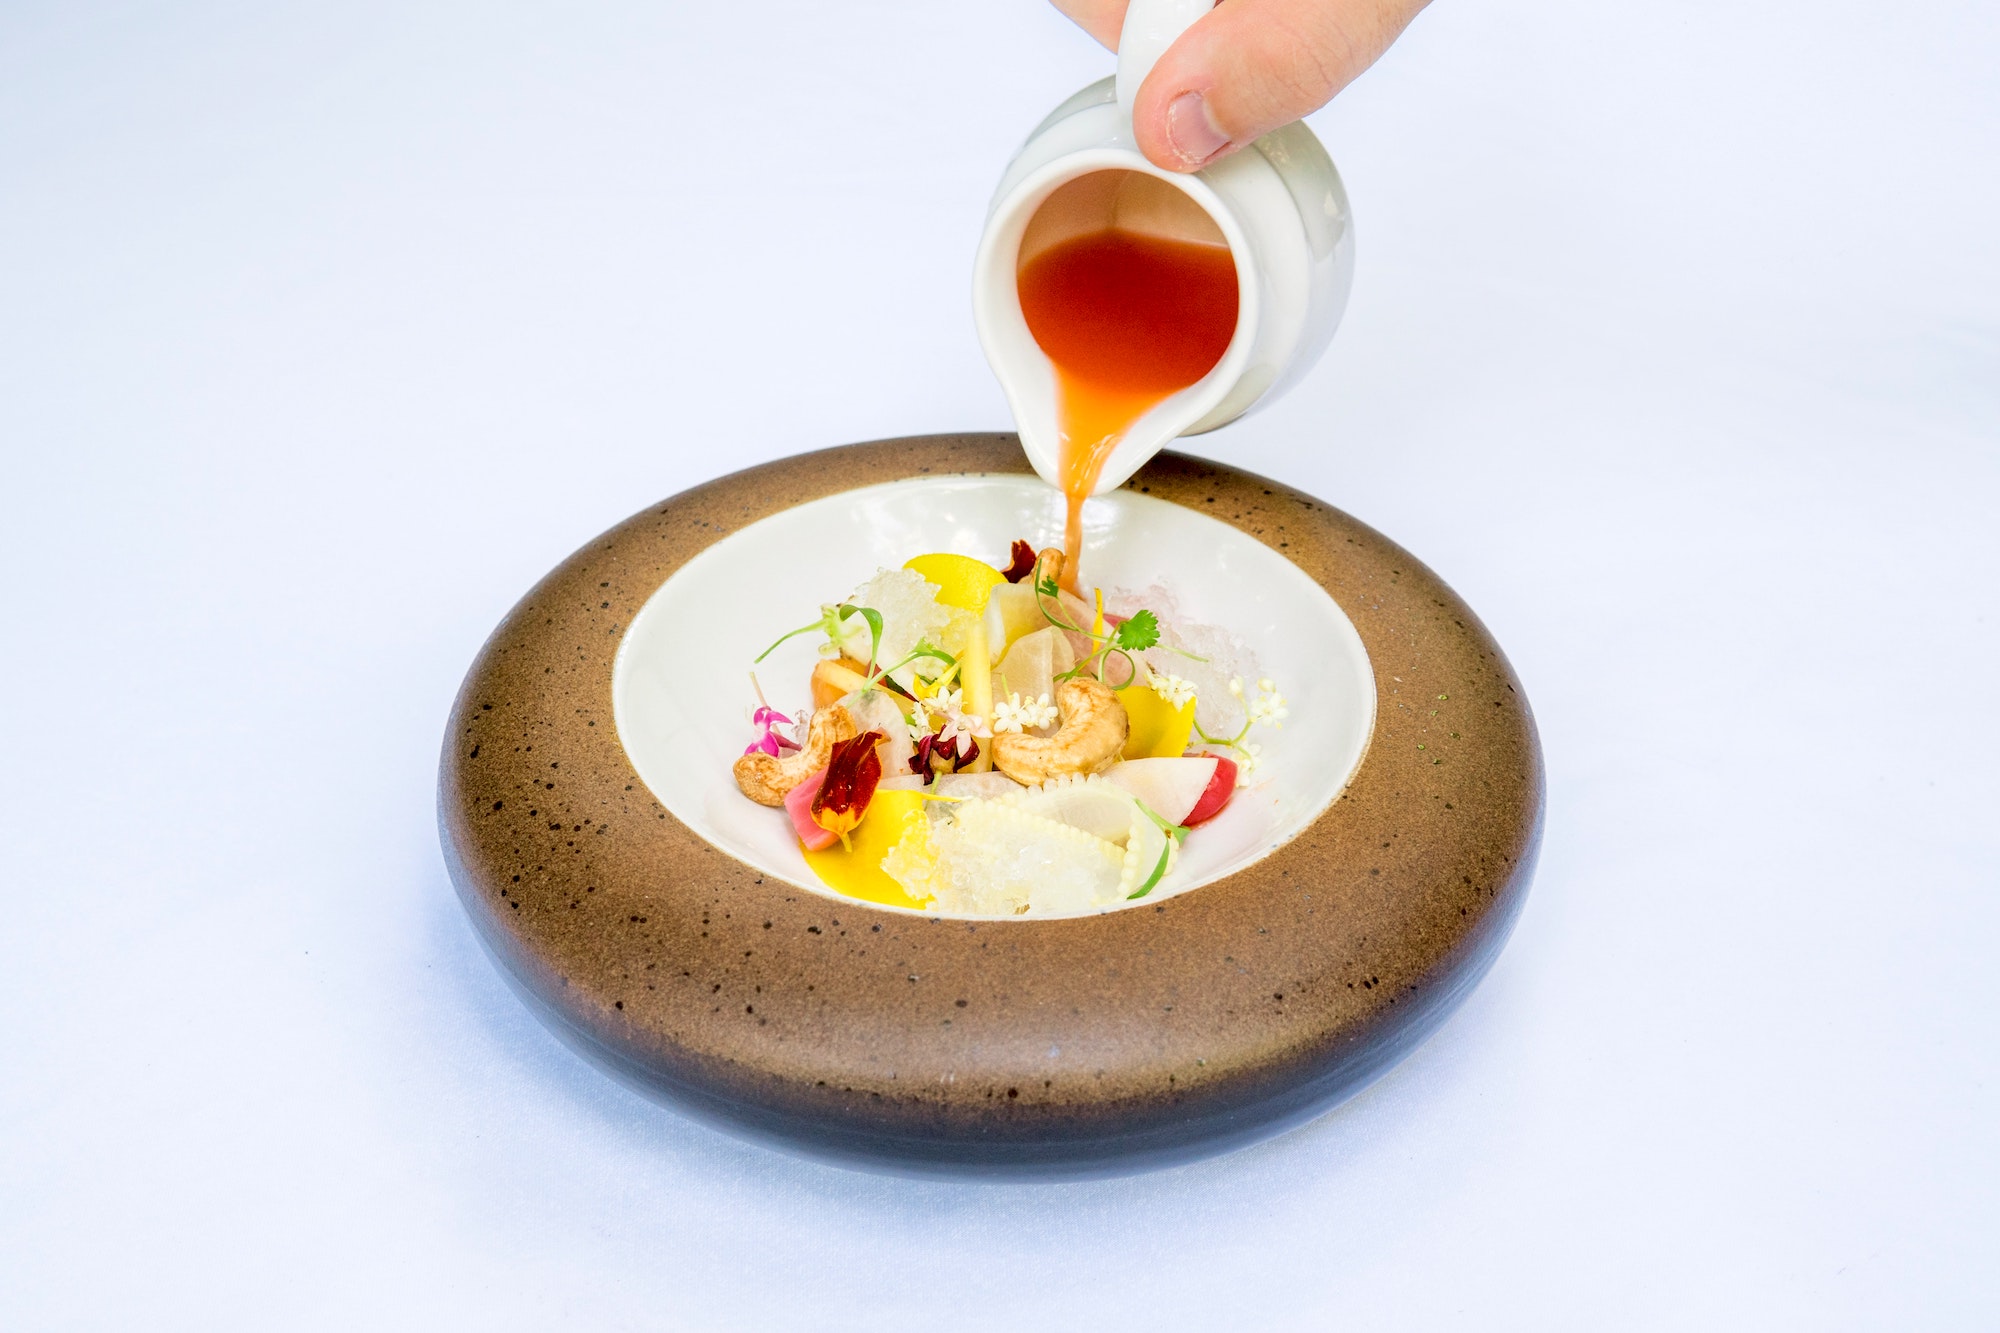 One of the dishes at fine dining establishment Mozaic Restaurant in Bali